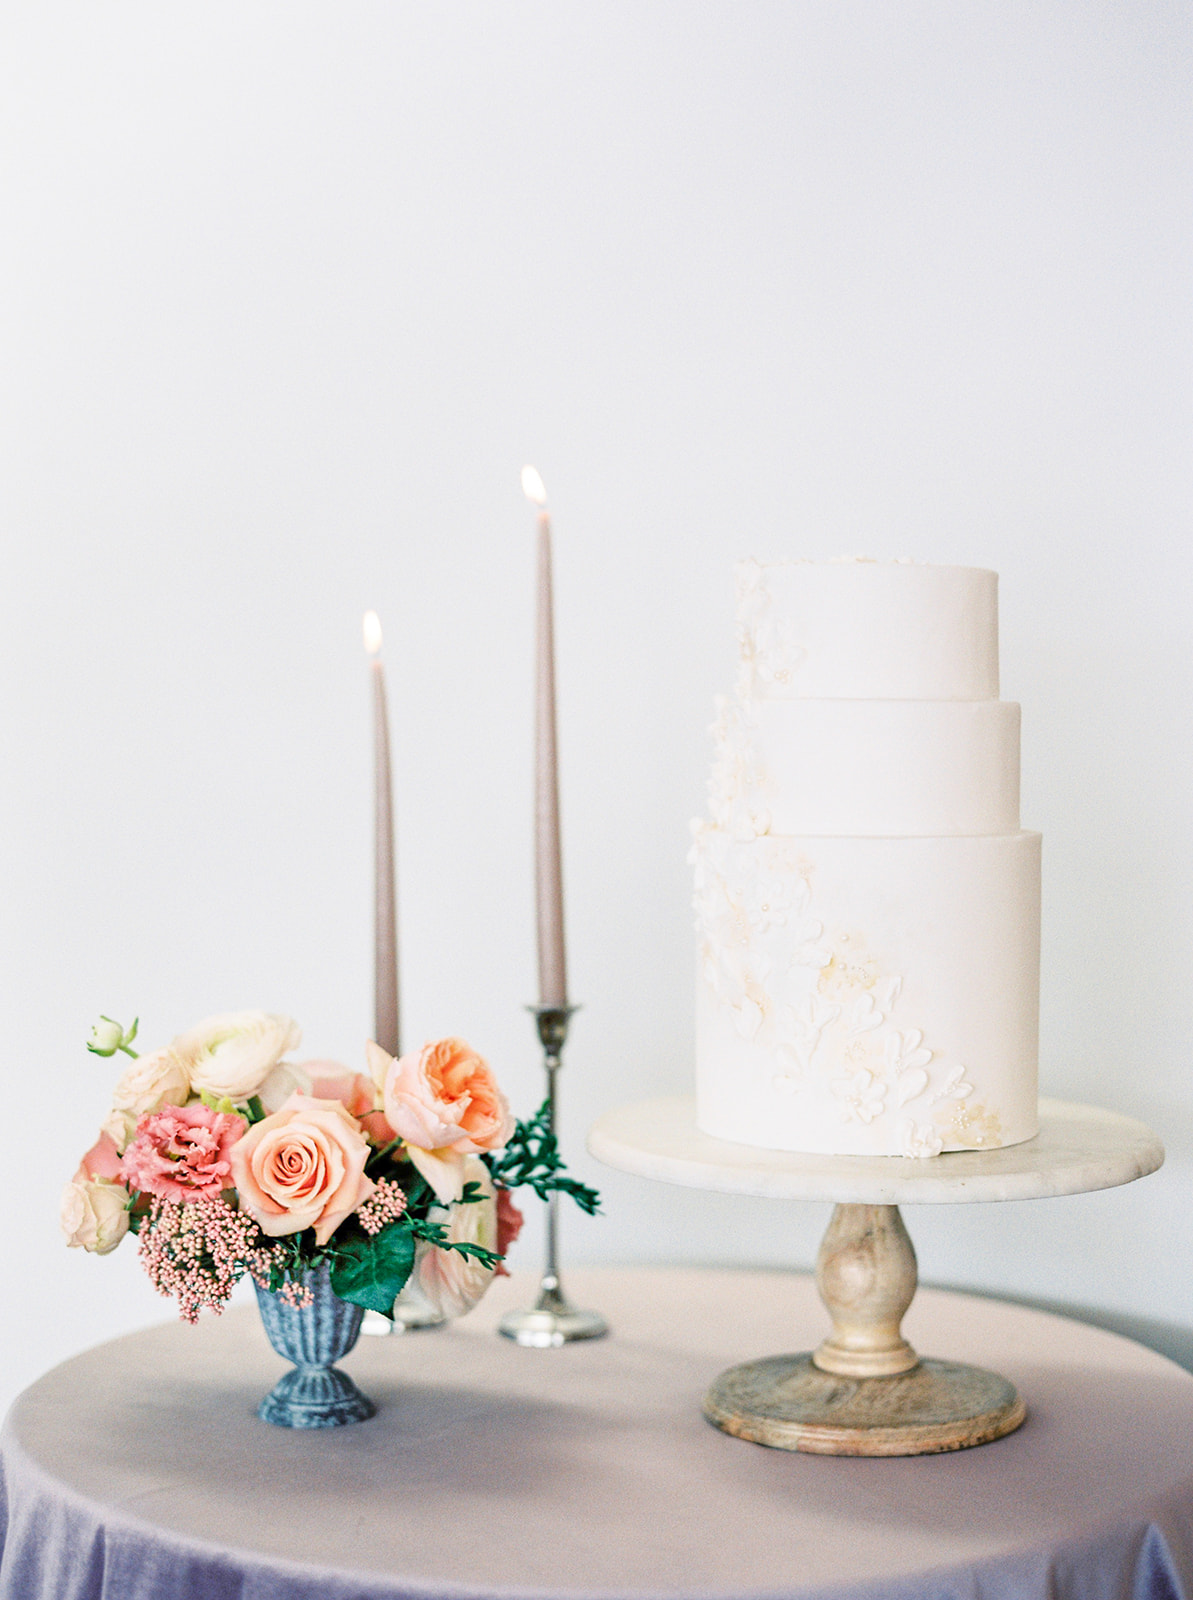 Show-stopping monochromatic white wedding cake with floral details